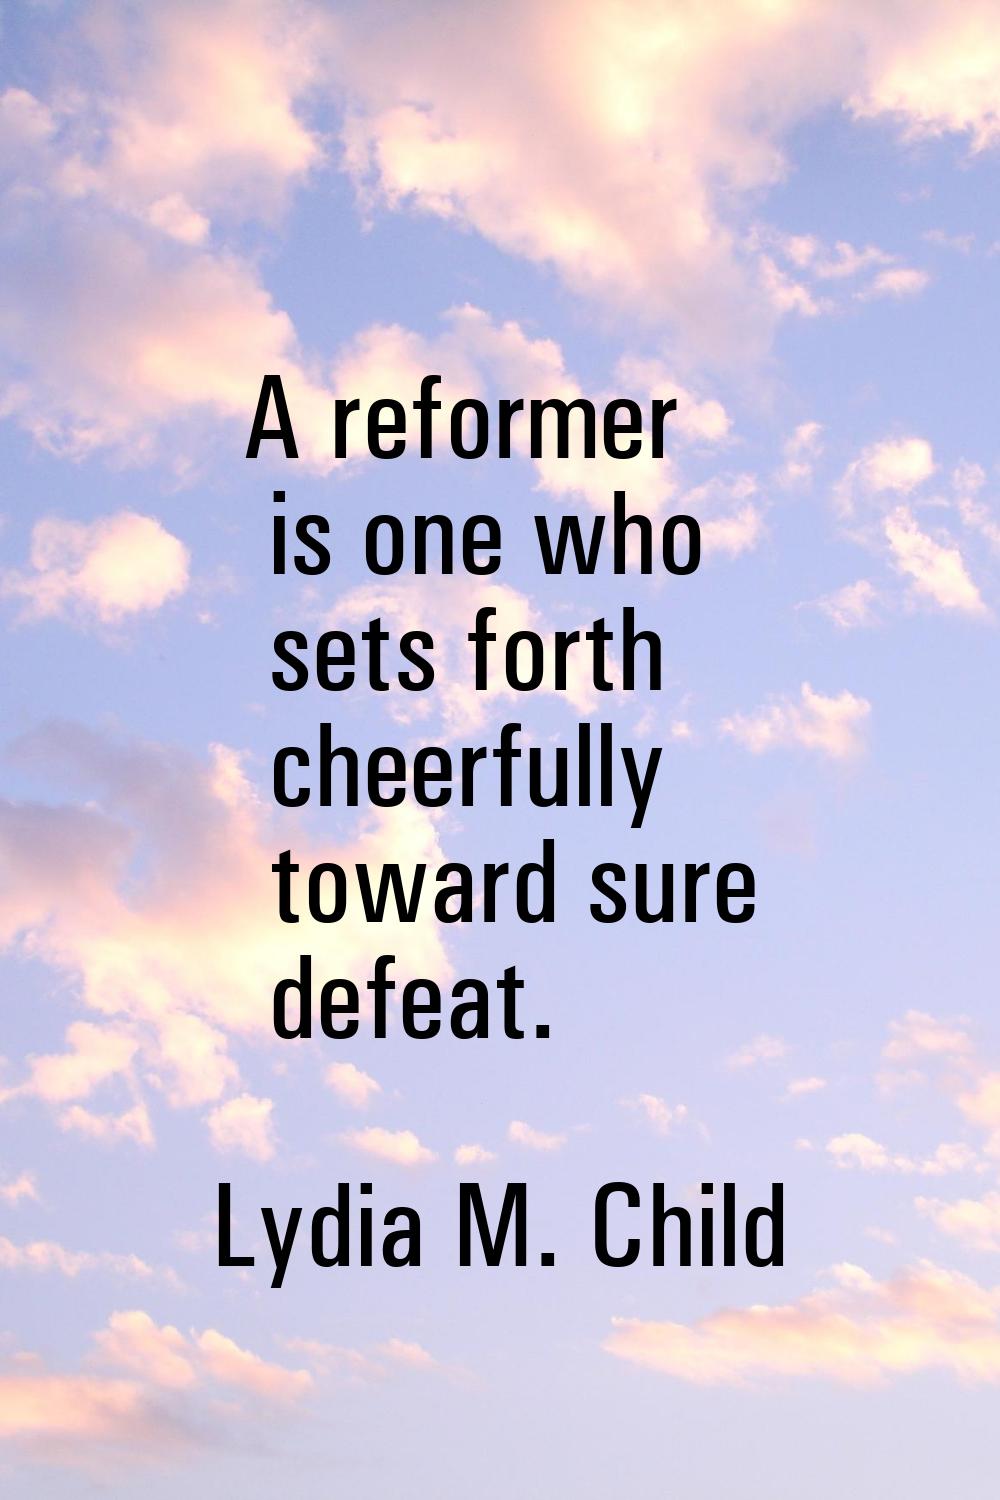 A reformer is one who sets forth cheerfully toward sure defeat.